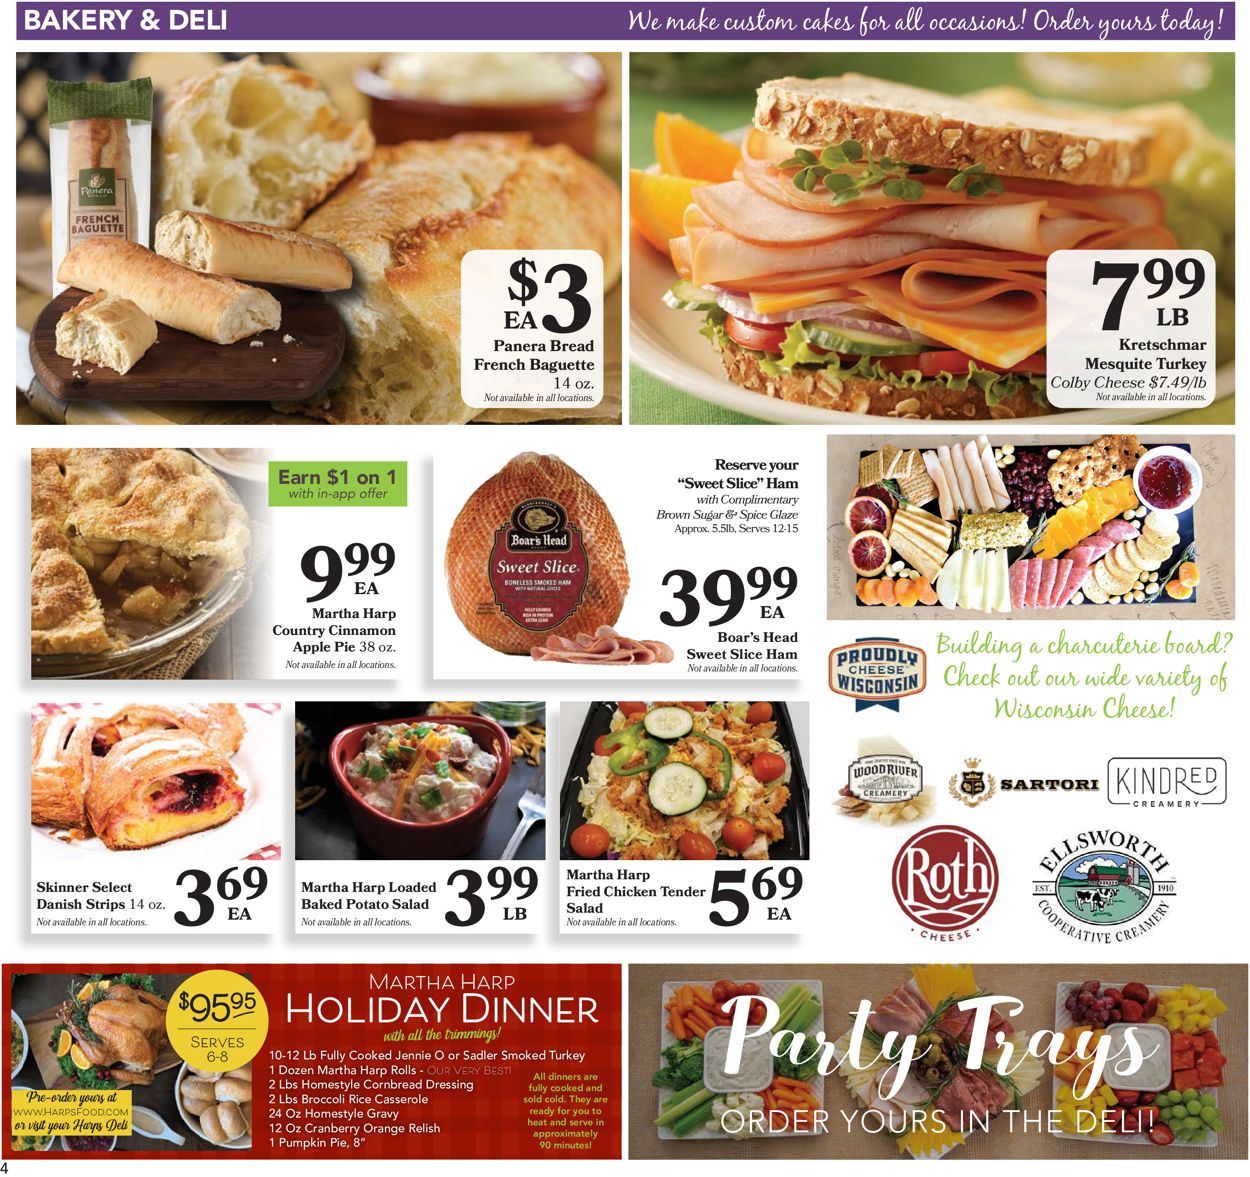 Harps Foods Ad from 12/01/2021